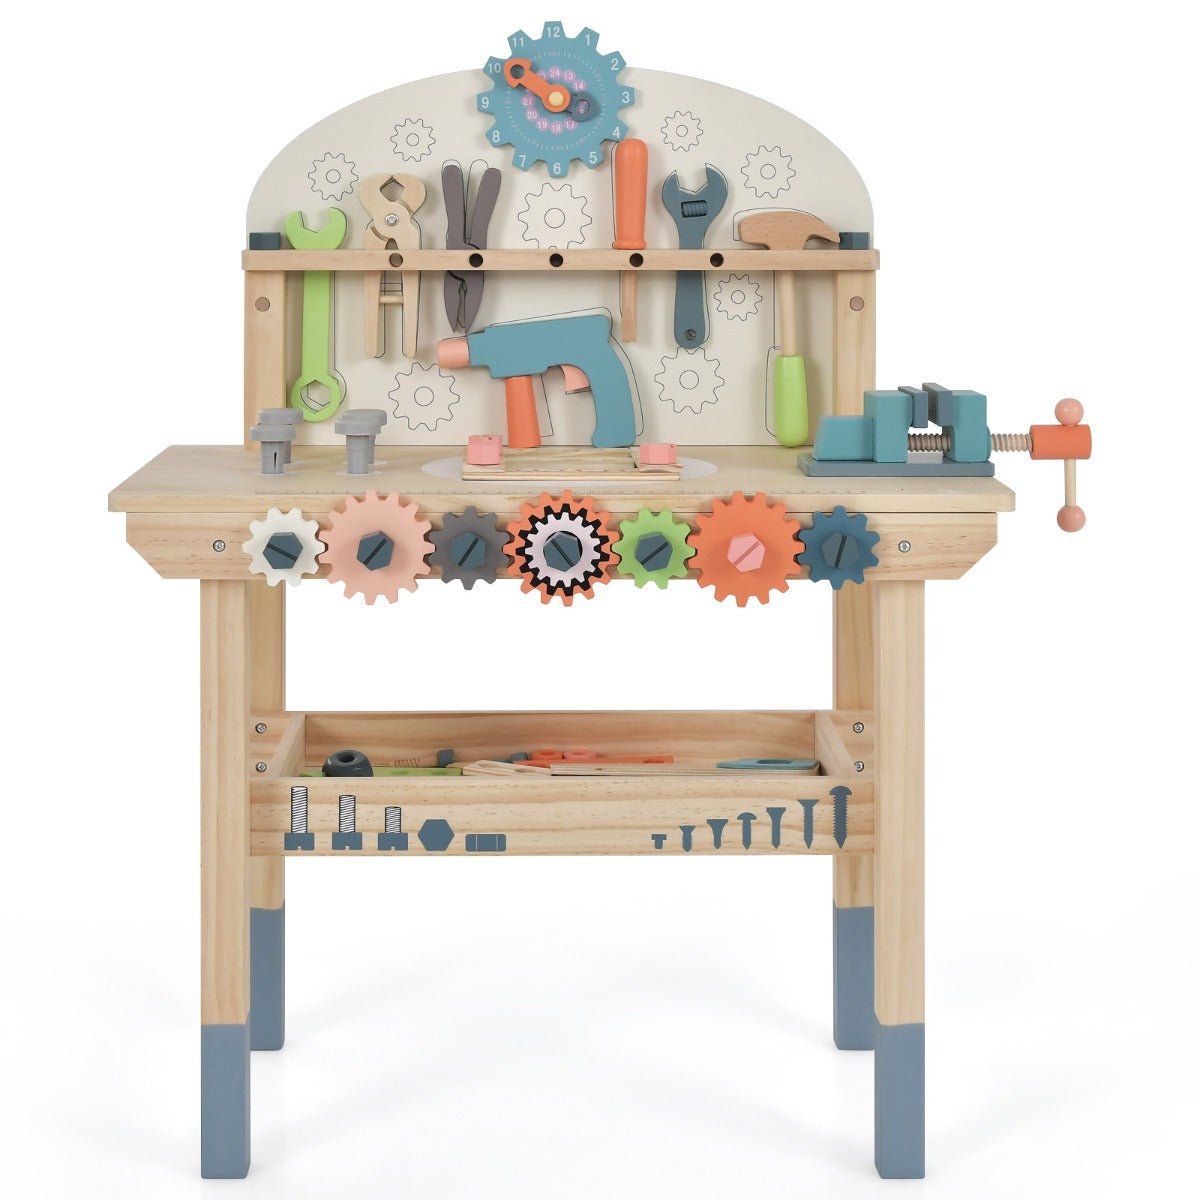 Child-Friendly Large Tool Bench Set for Endless Play